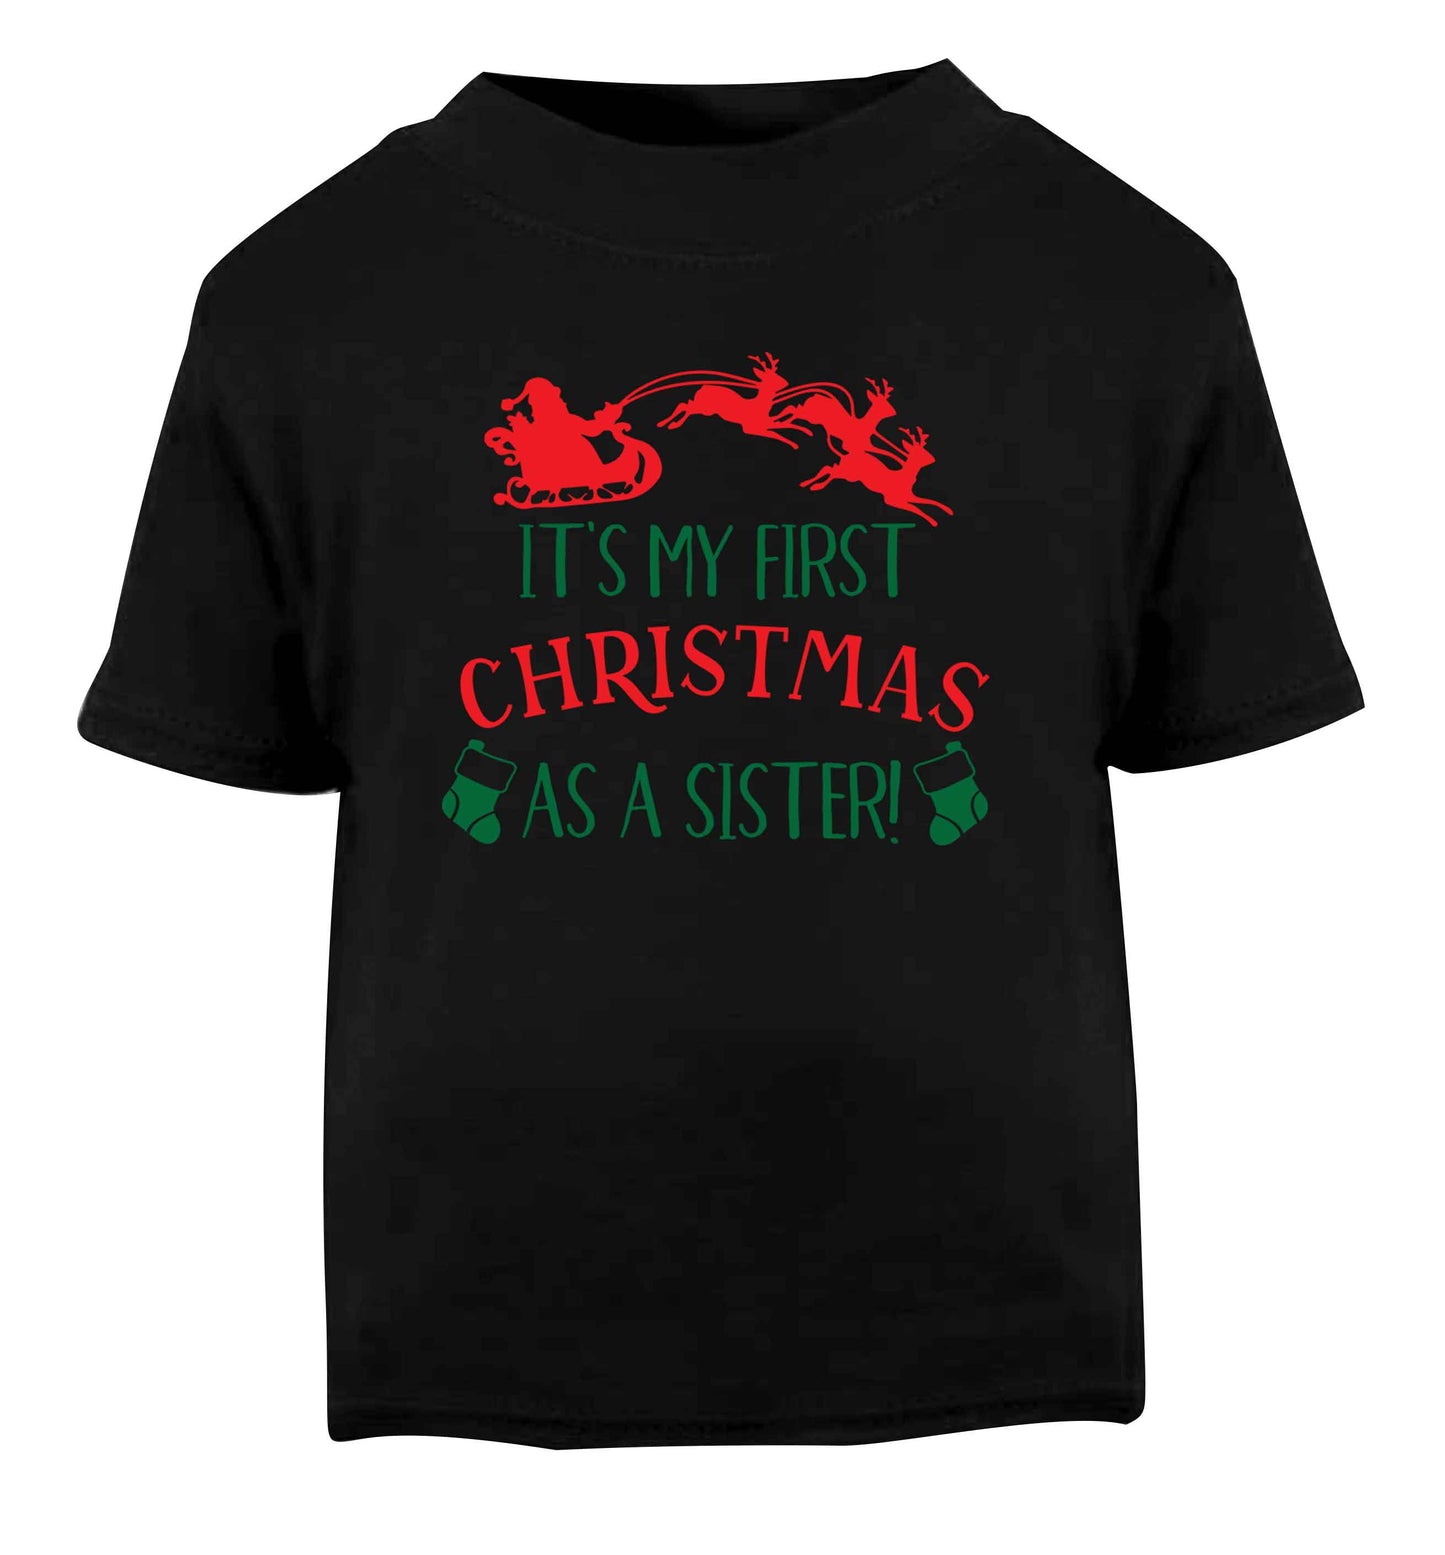 It's my first Christmas as a sister! Black Baby Toddler Tshirt 2 years